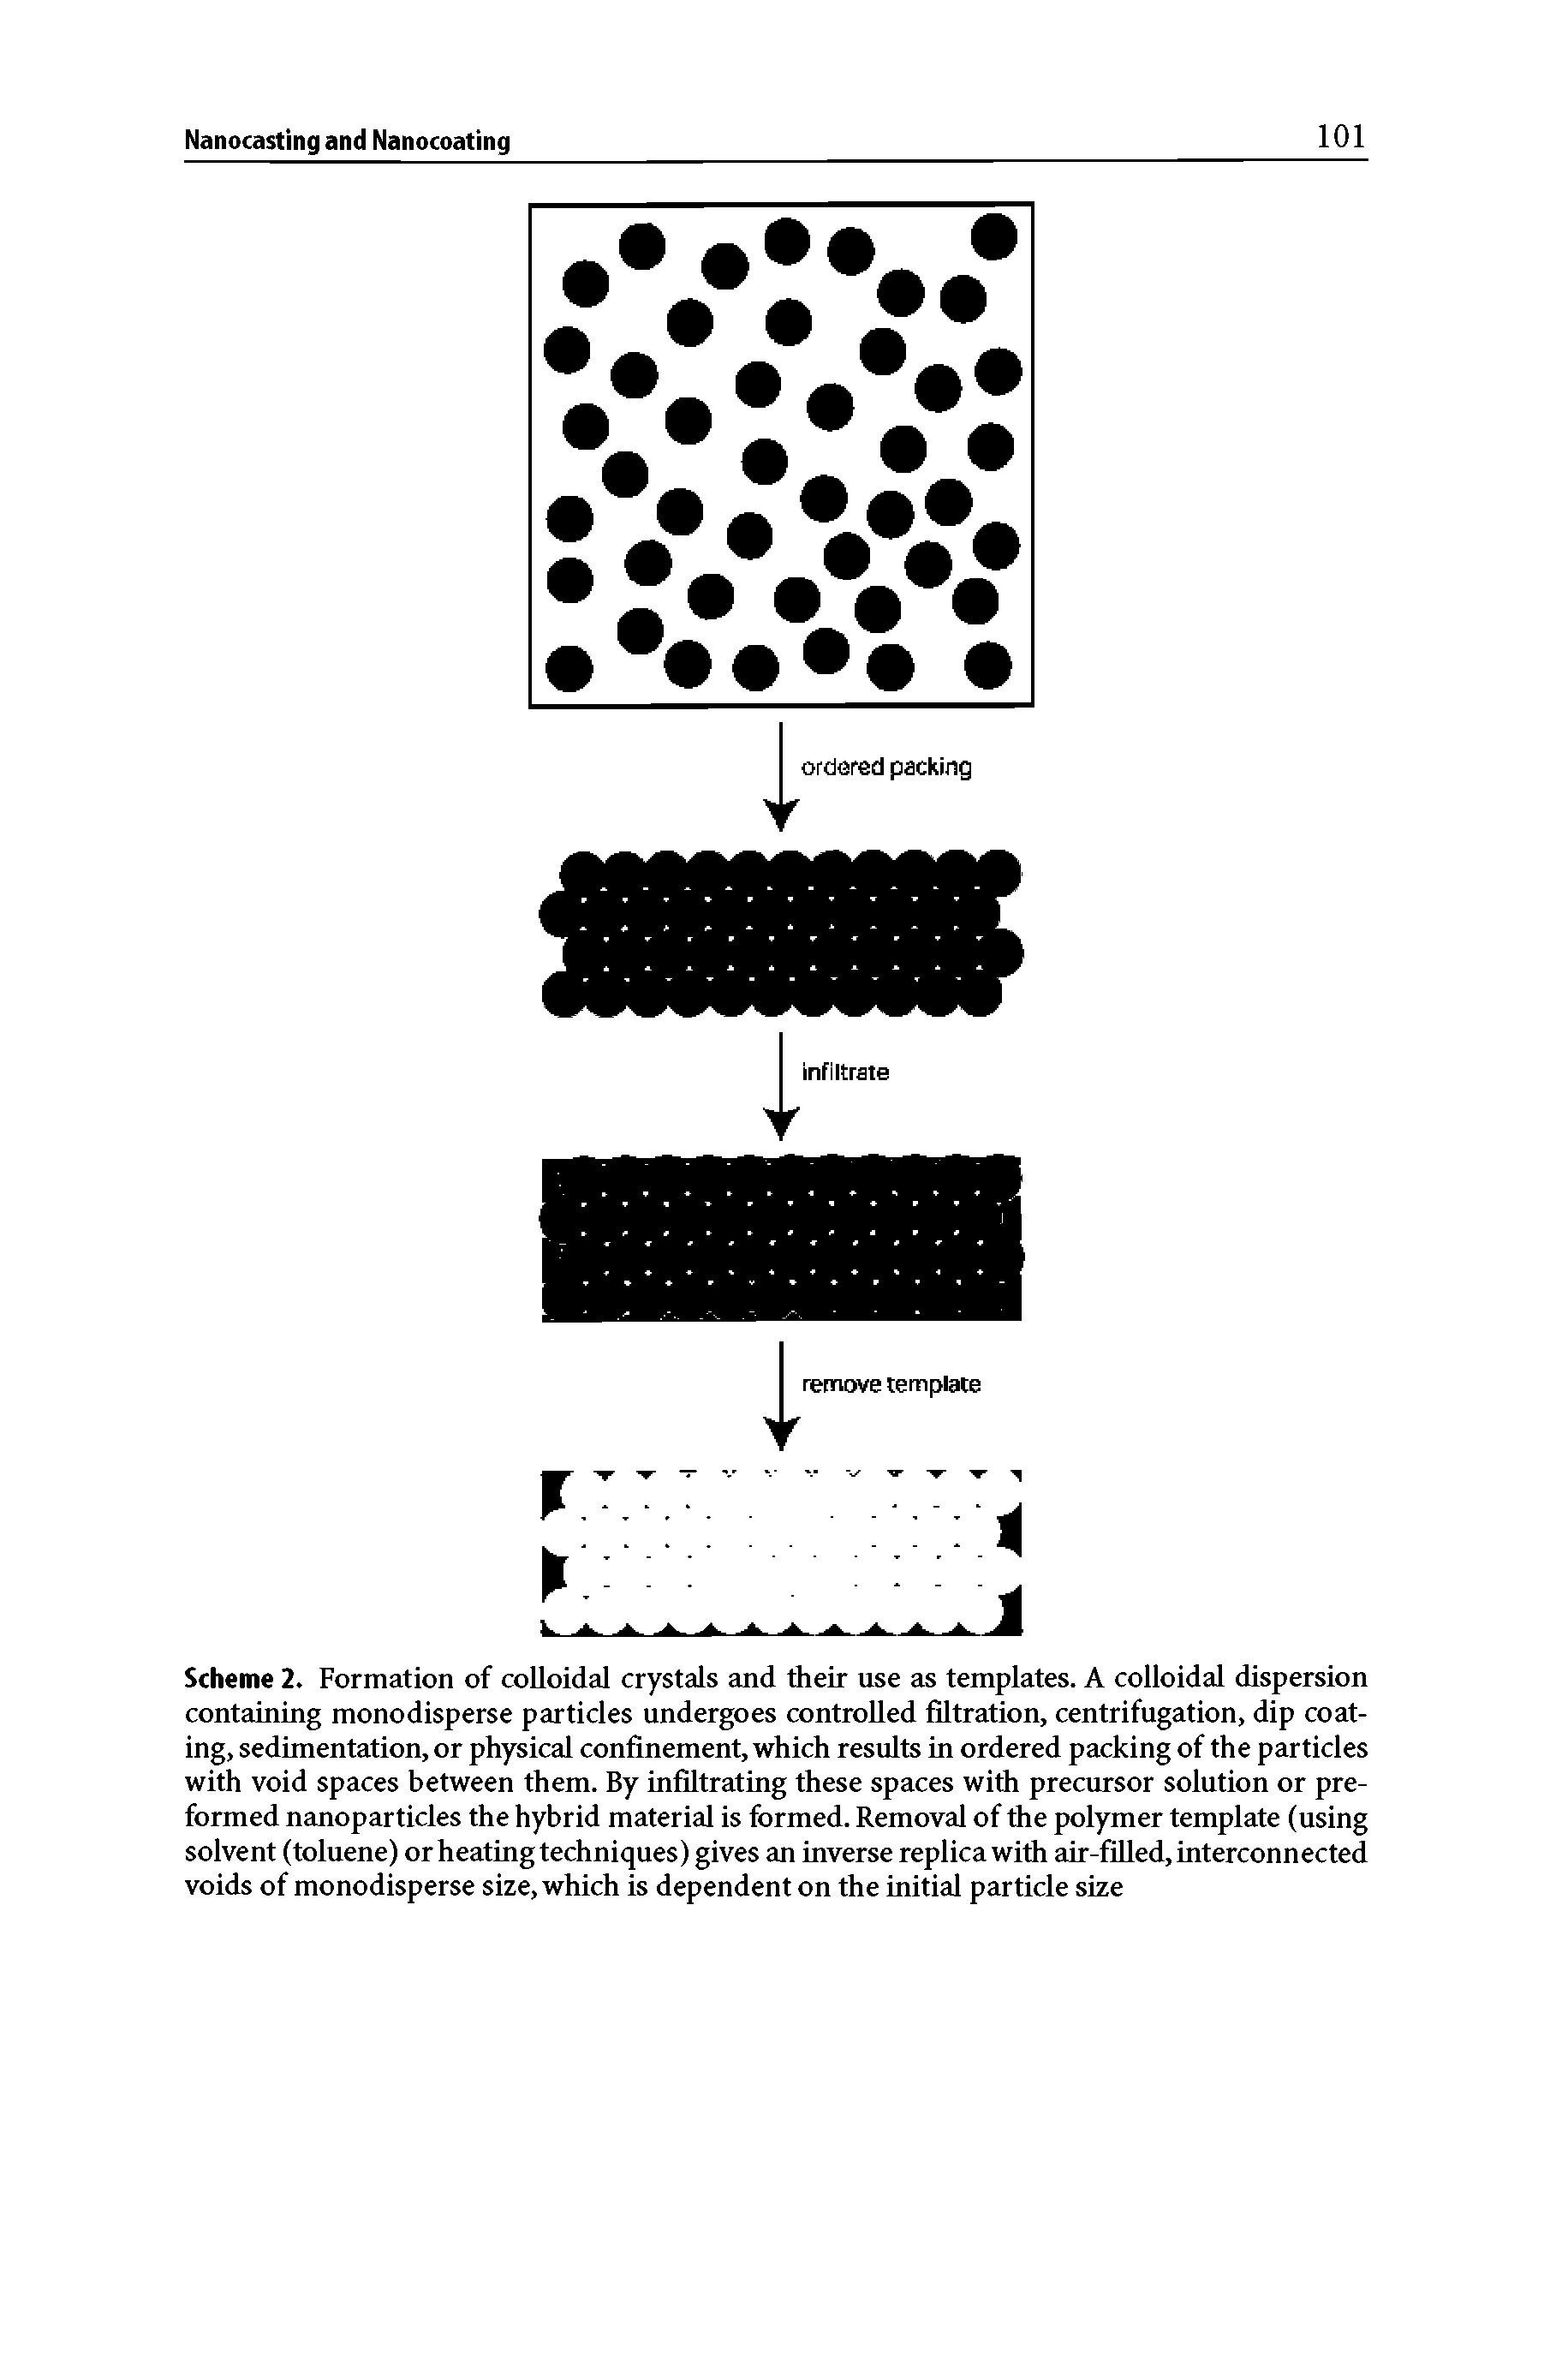 Scheme 2. Formation of colloidal crystals and their use as templates. A colloidal dispersion containing monodisperse particles undergoes controlled filtration, centrifugation, dip coating, sedimentation, or physical confinement, which results in ordered packing of the particles with void spaces between them. By infiltrating these spaces with precm-sor solution or preformed nemoparticles the hybrid material is formed. Removal of the polymer template (using solvent (toluene) orheatingtechniques) gives an inverse replica with air-fiUed, interconnected voids of monodisperse size, which is dependent on the initial particle size...